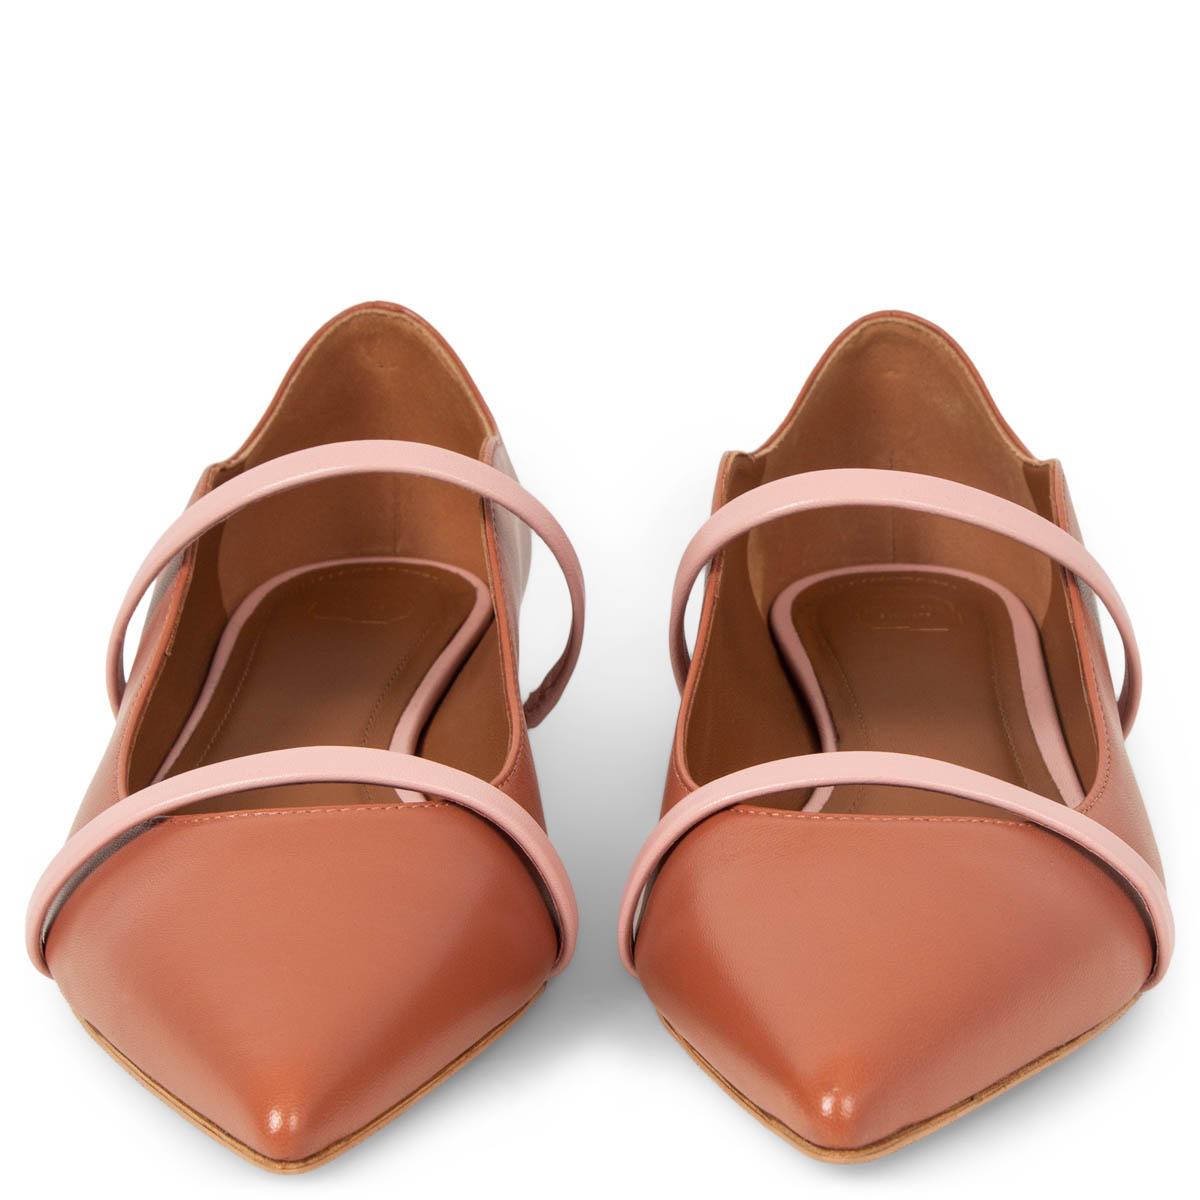 100% authentic Malone Souliers Maureen point-toe ballet flats made from brick brown calfleather and the label's customary double-strap design in pale rose leather. Brand new. Come with dust bag and rubber sole got added. 

Measurements
Imprinted